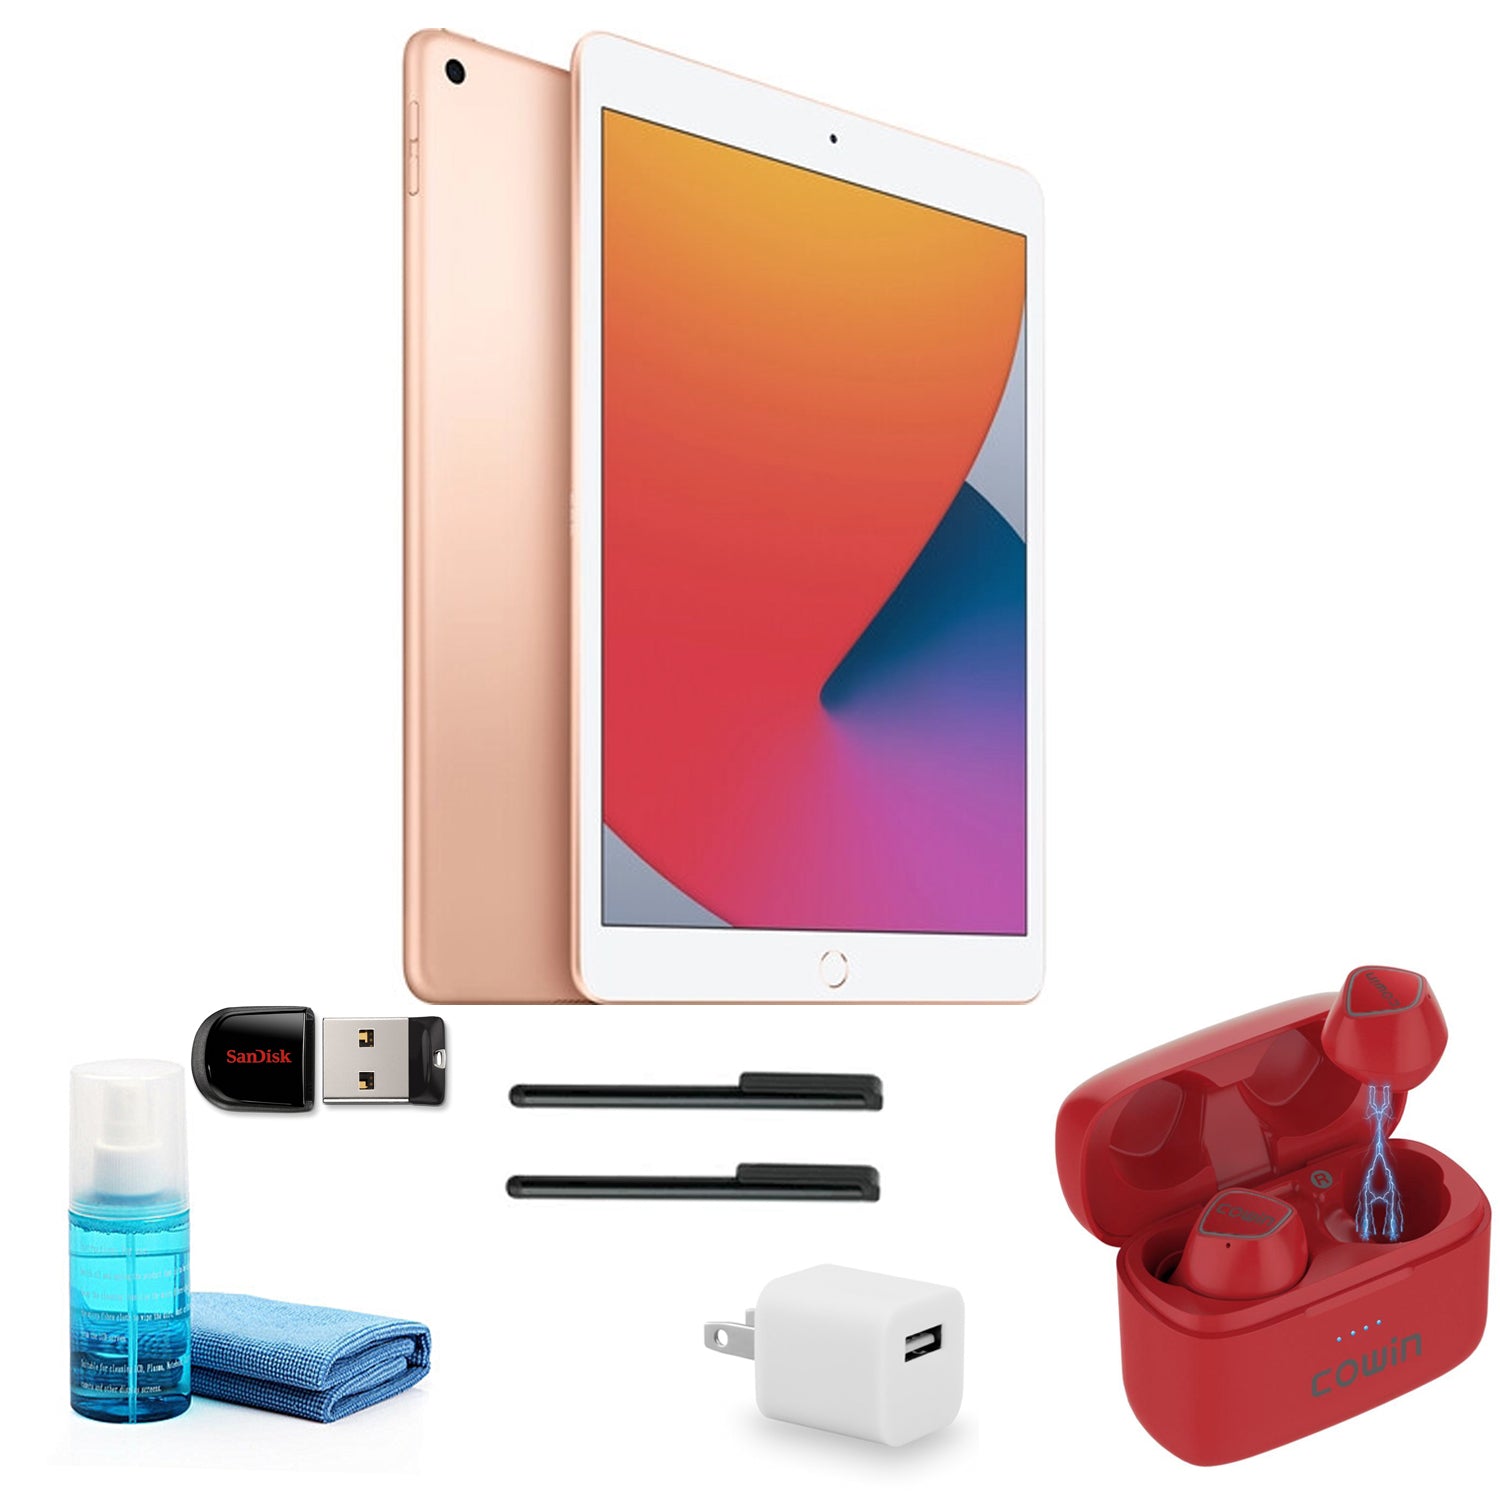 Apple iPad 10.2 Inch (32GB, Gold, MYLC2LL/A) with Red Earbuds and more